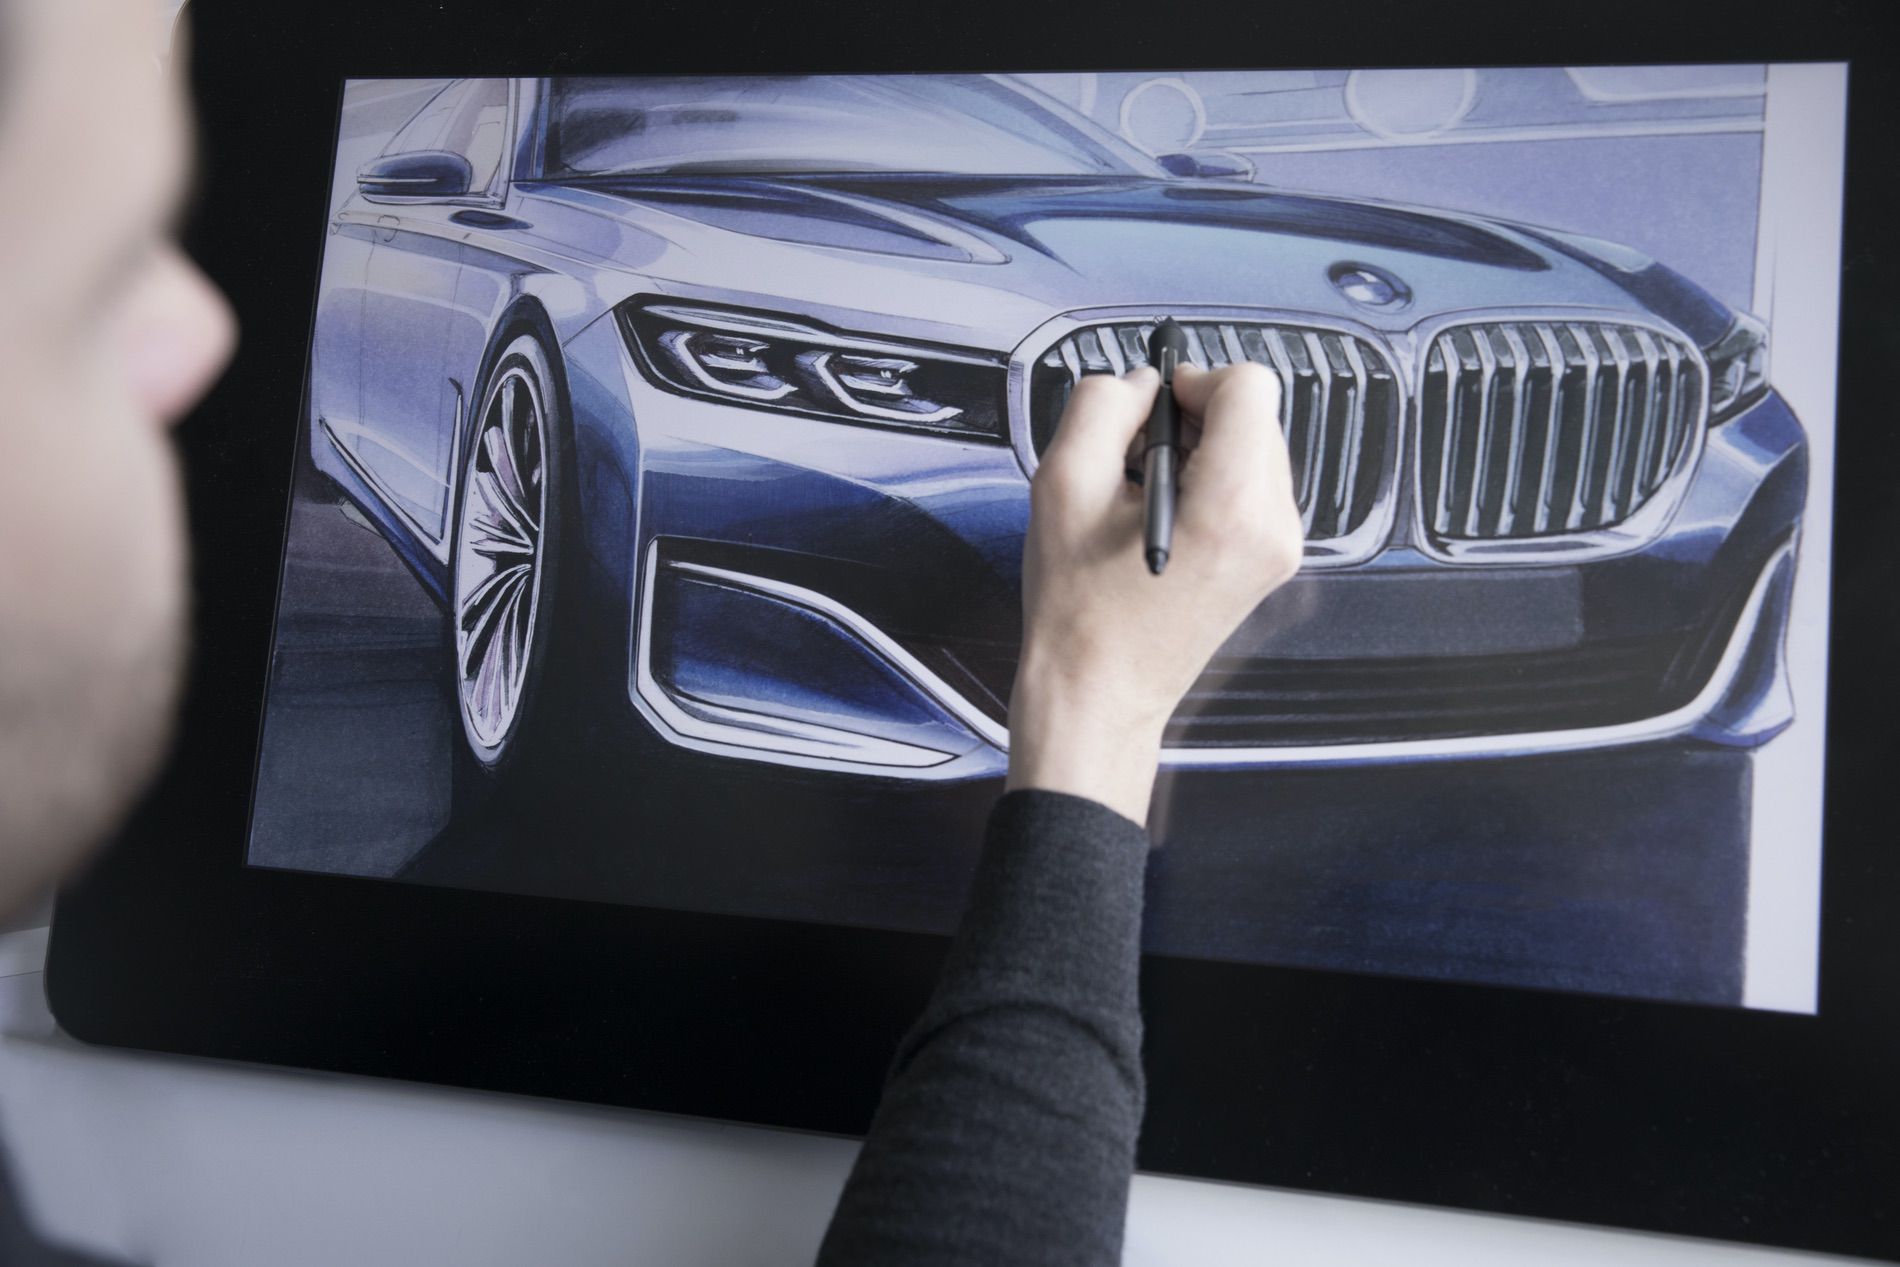 BMW 7 Series Facelift sketches 06